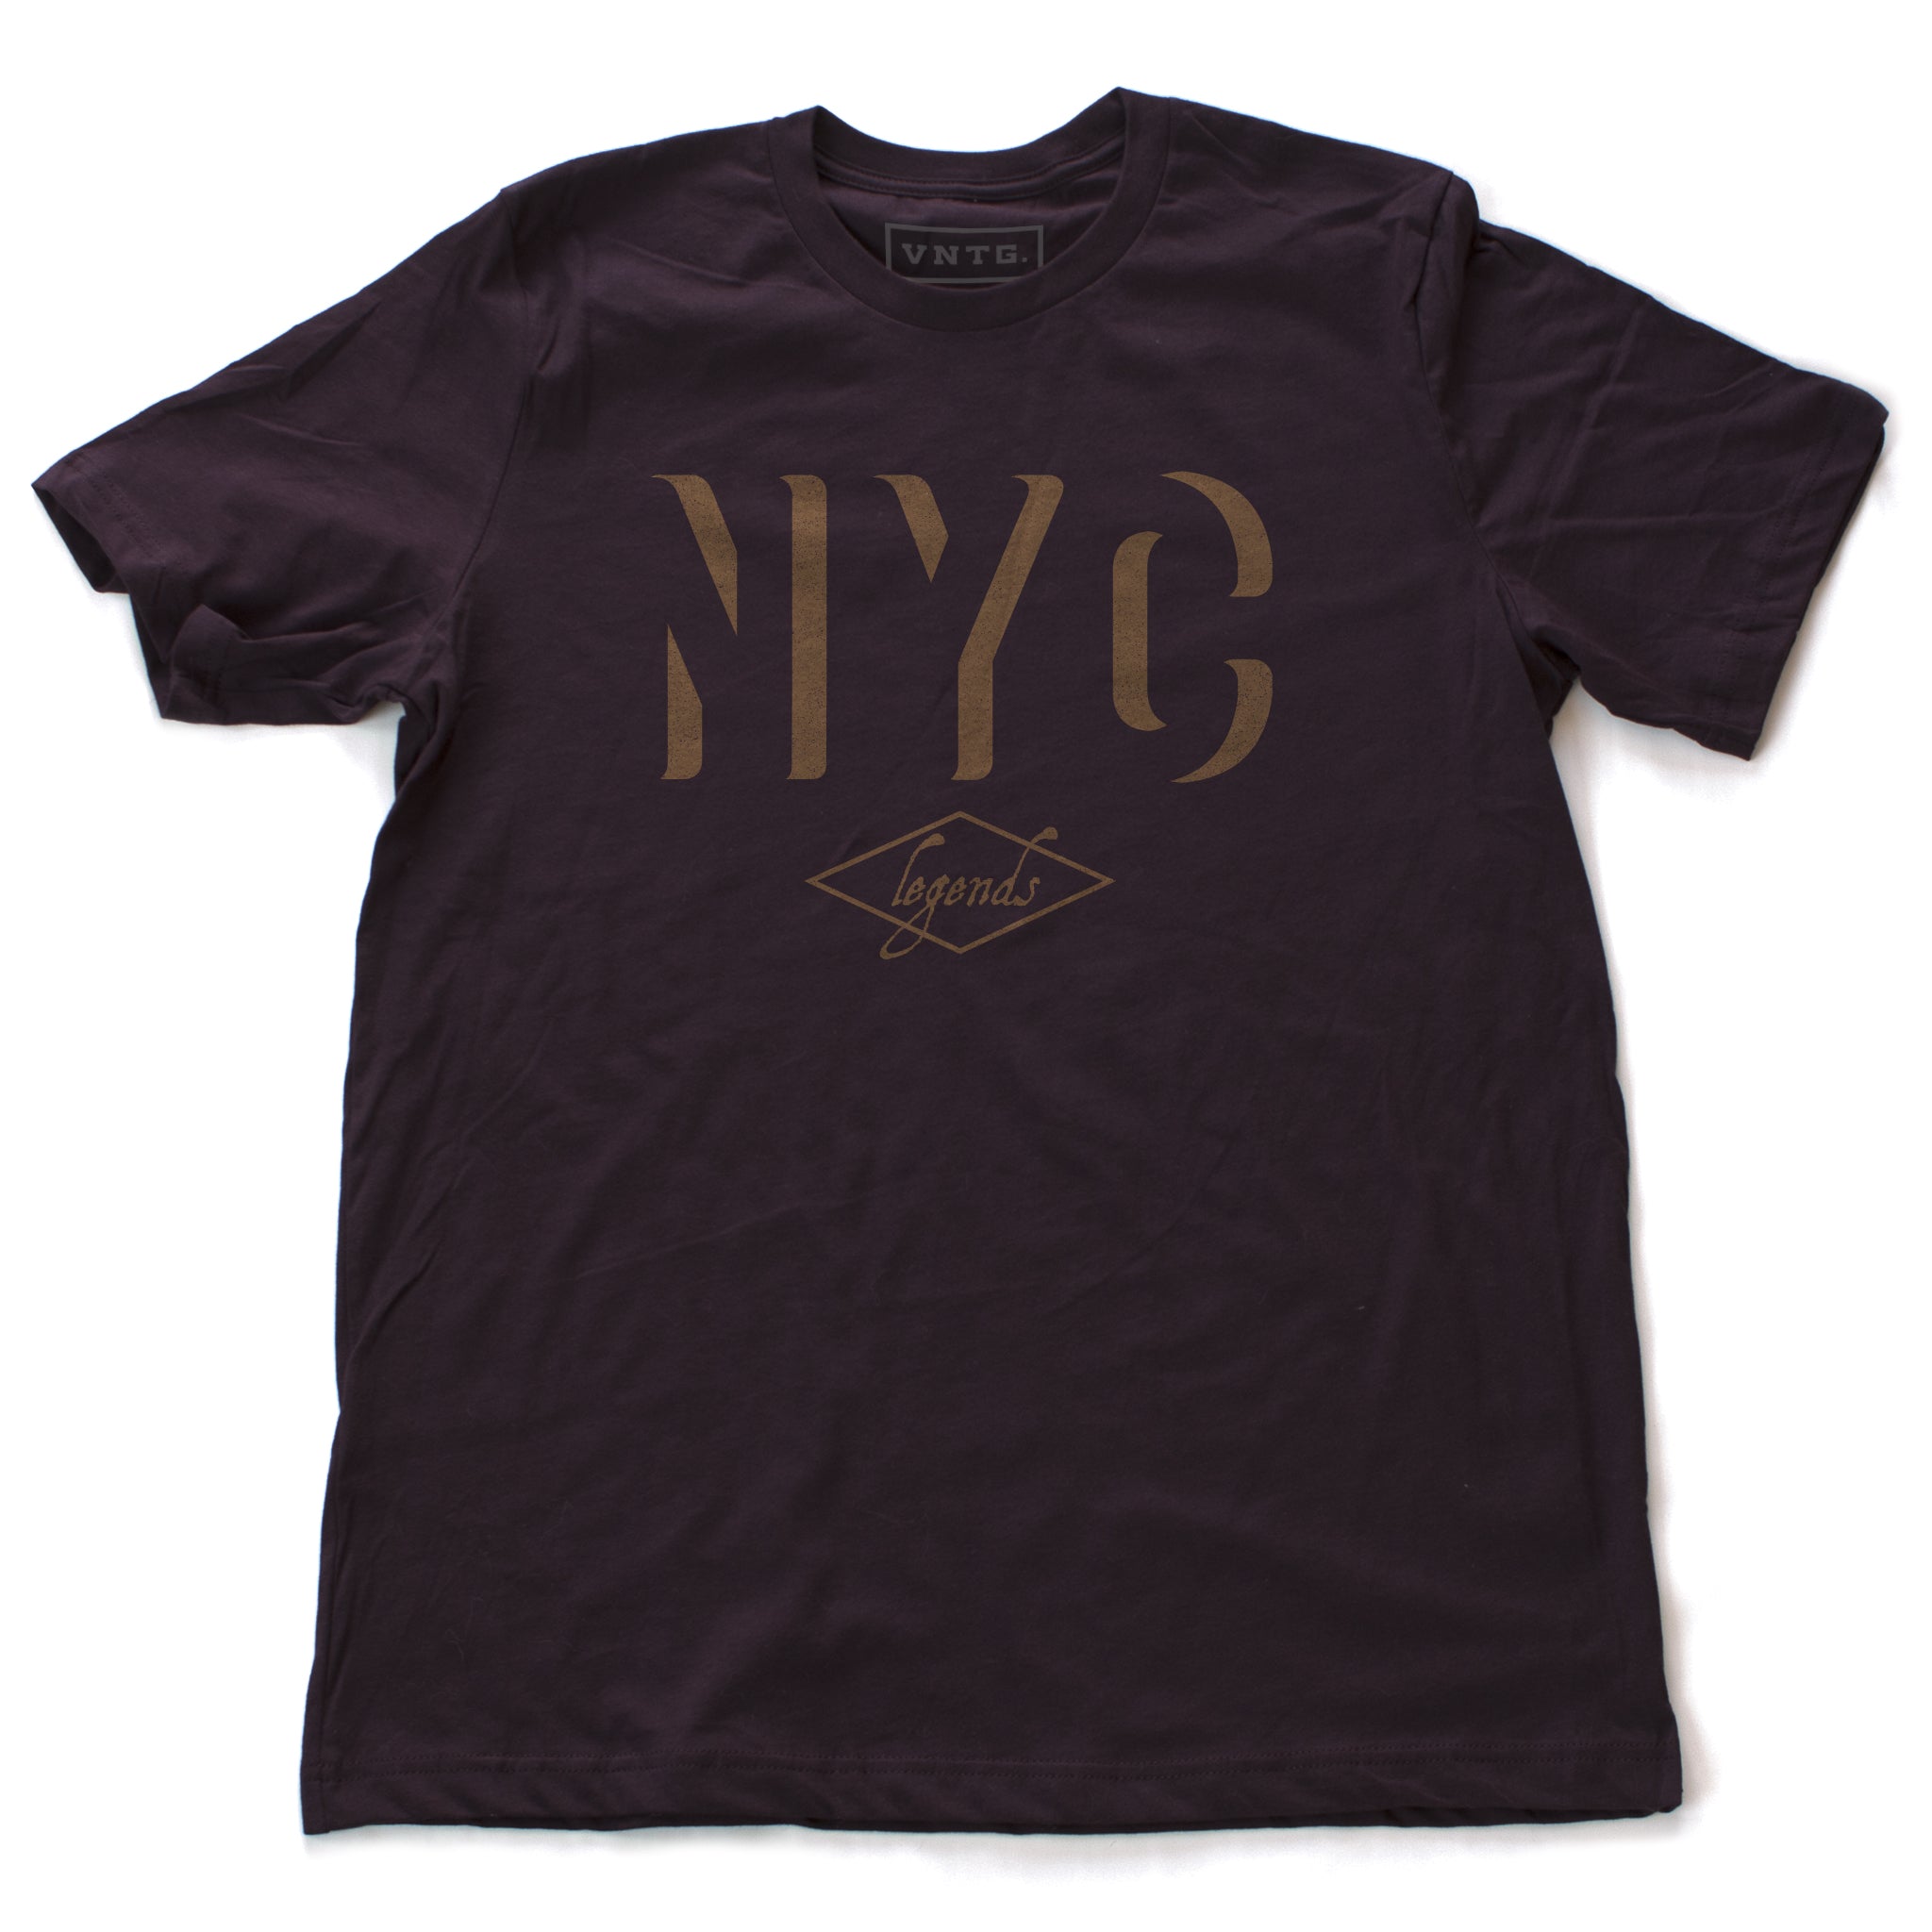 A retro, vintage-inspired t-shirt in Oxblood/deep burgundy, with a bold “NYC” in a gold tone shadow font, and the word “legends” inscript below. By fashion brand VNTG., from wolfsaint.net